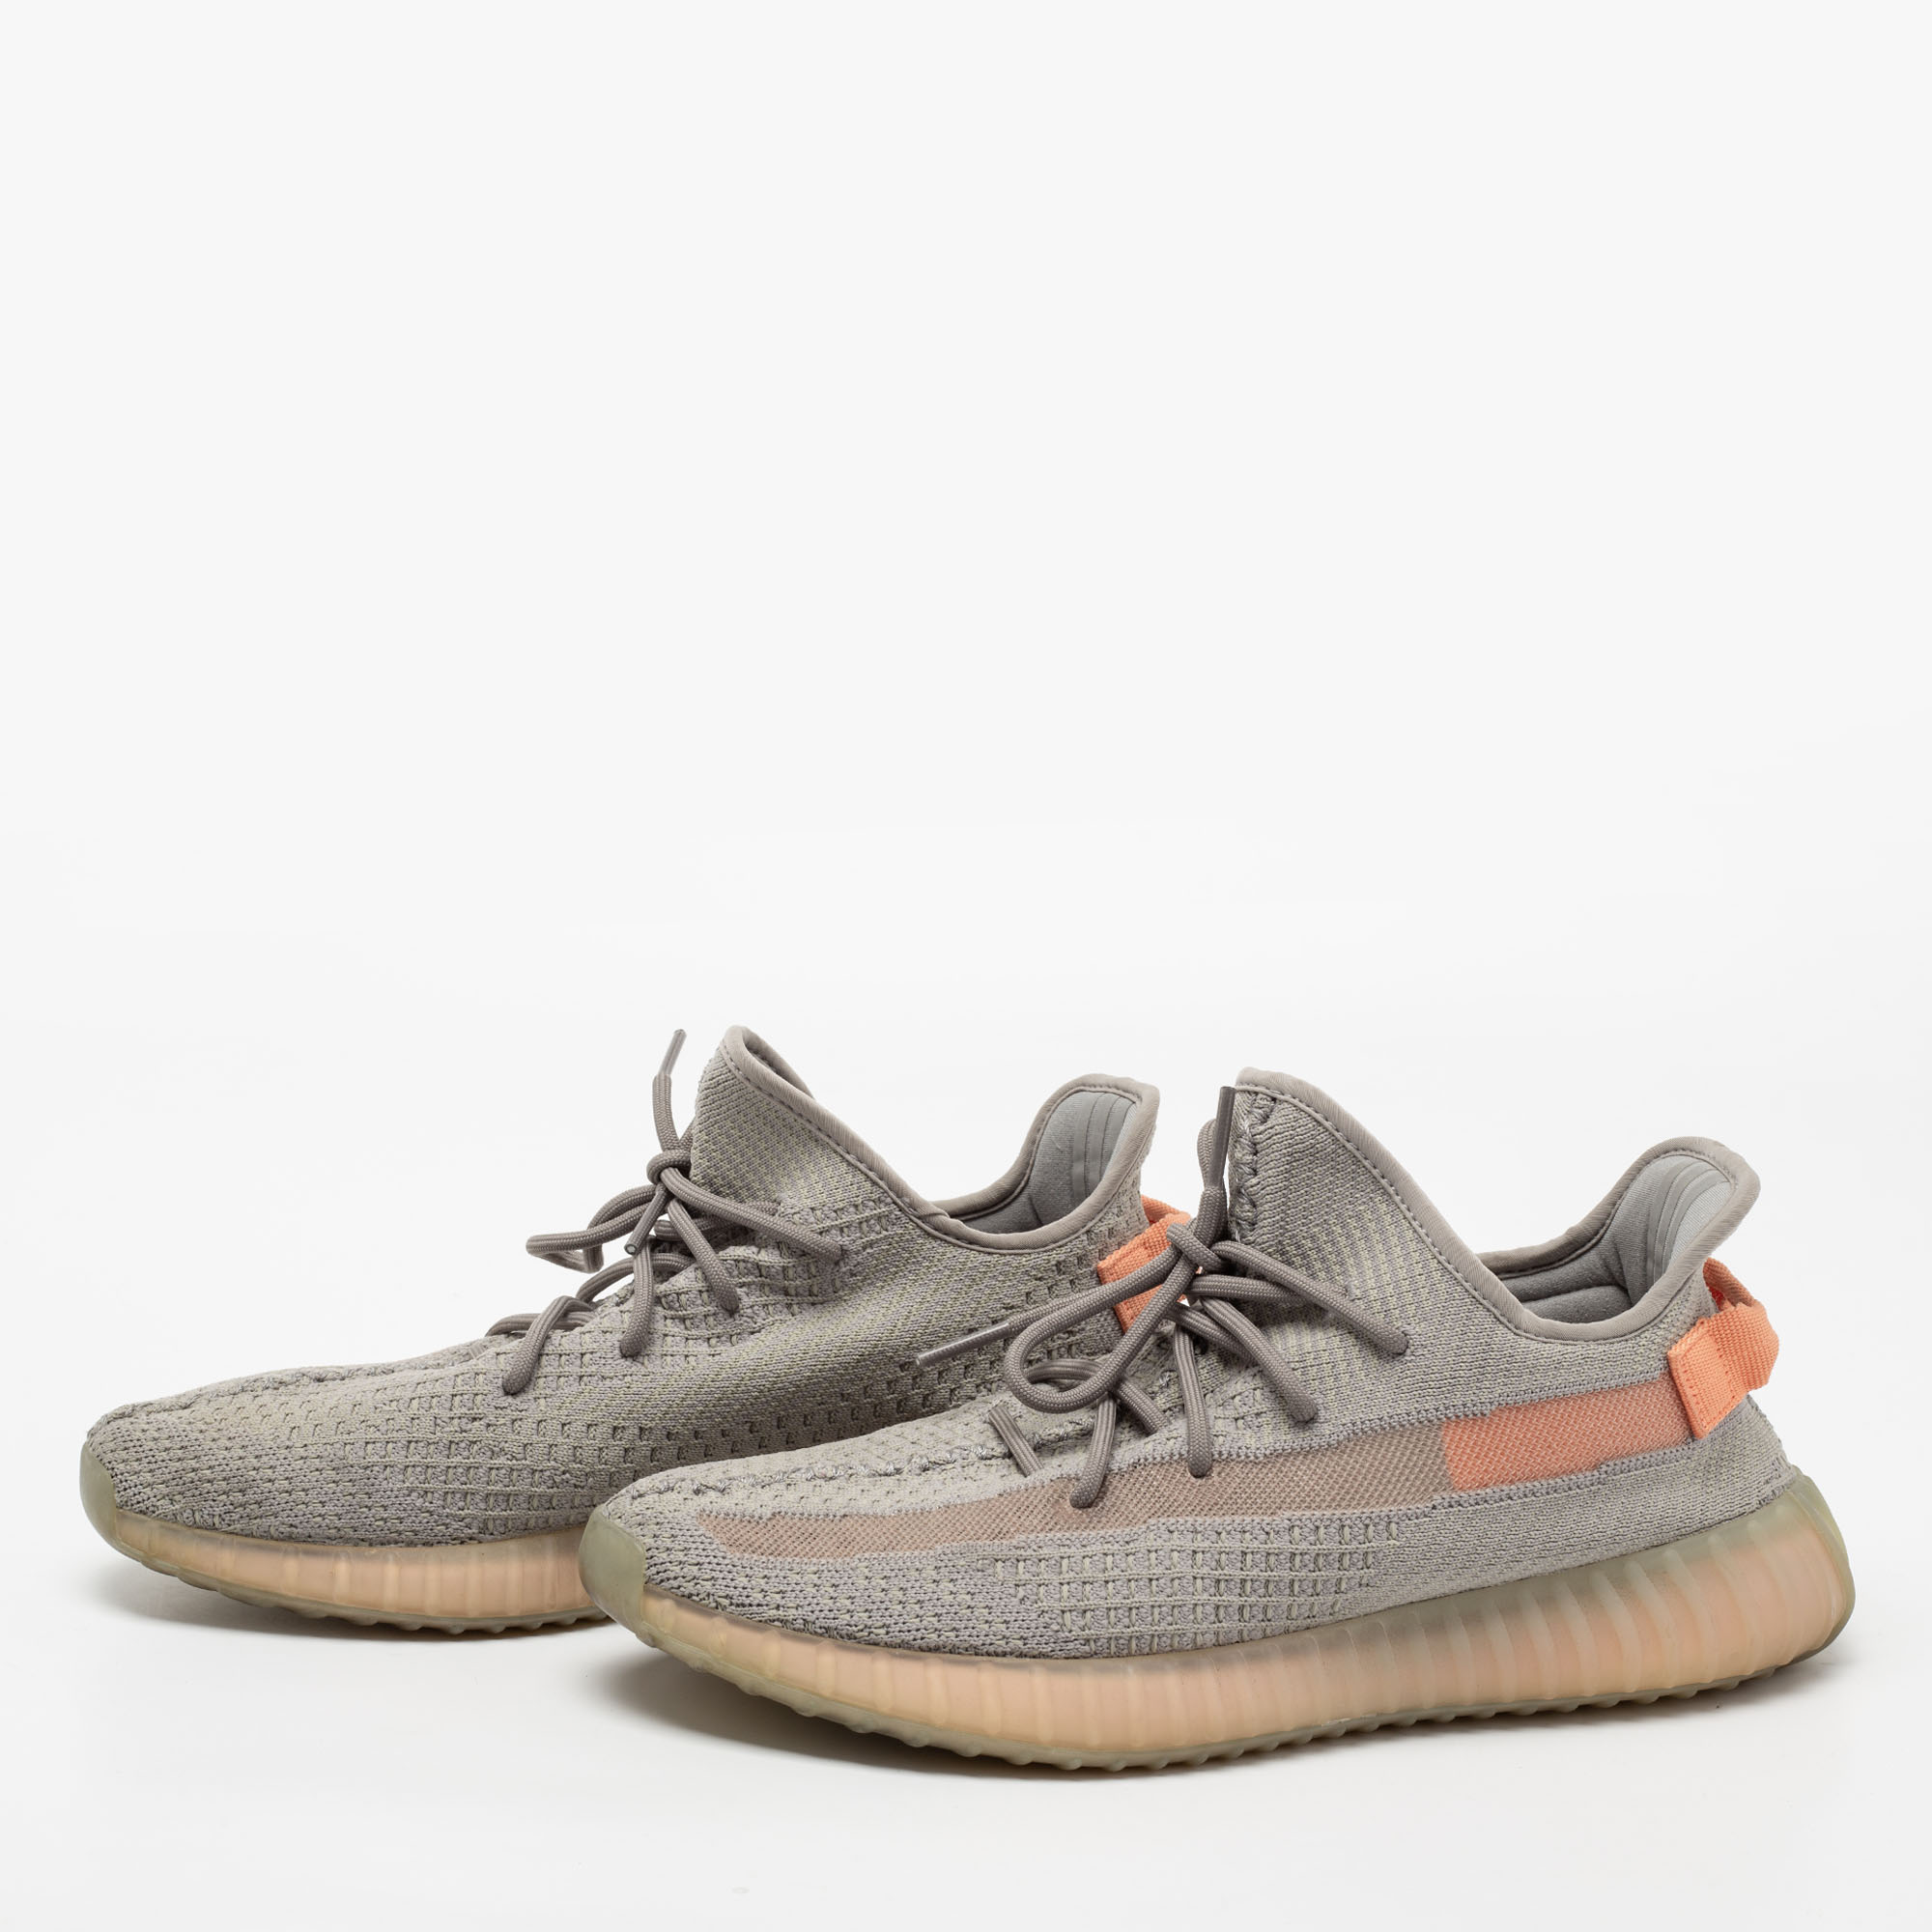 

Yeezy x Adidas Grey Knit Fabric Boost 350 V2 True Form Sneakers Size